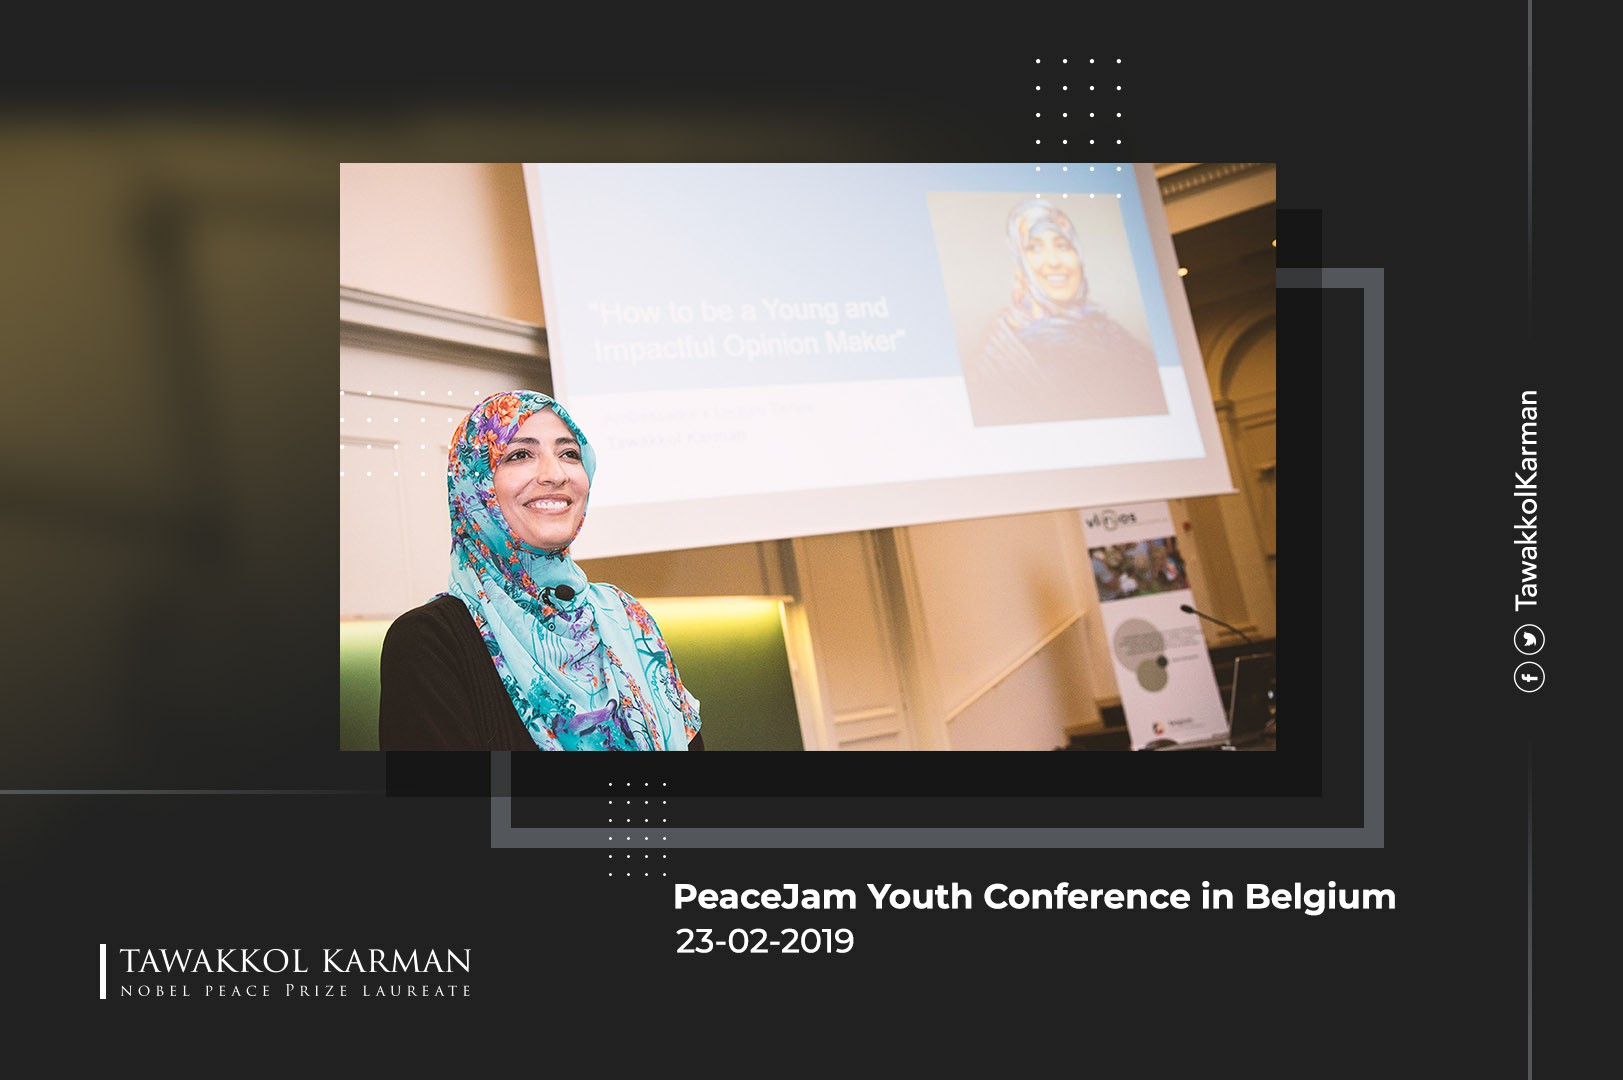 Participation of Tawakkol Karman in the PeaceJam Youth Conference in Belgium